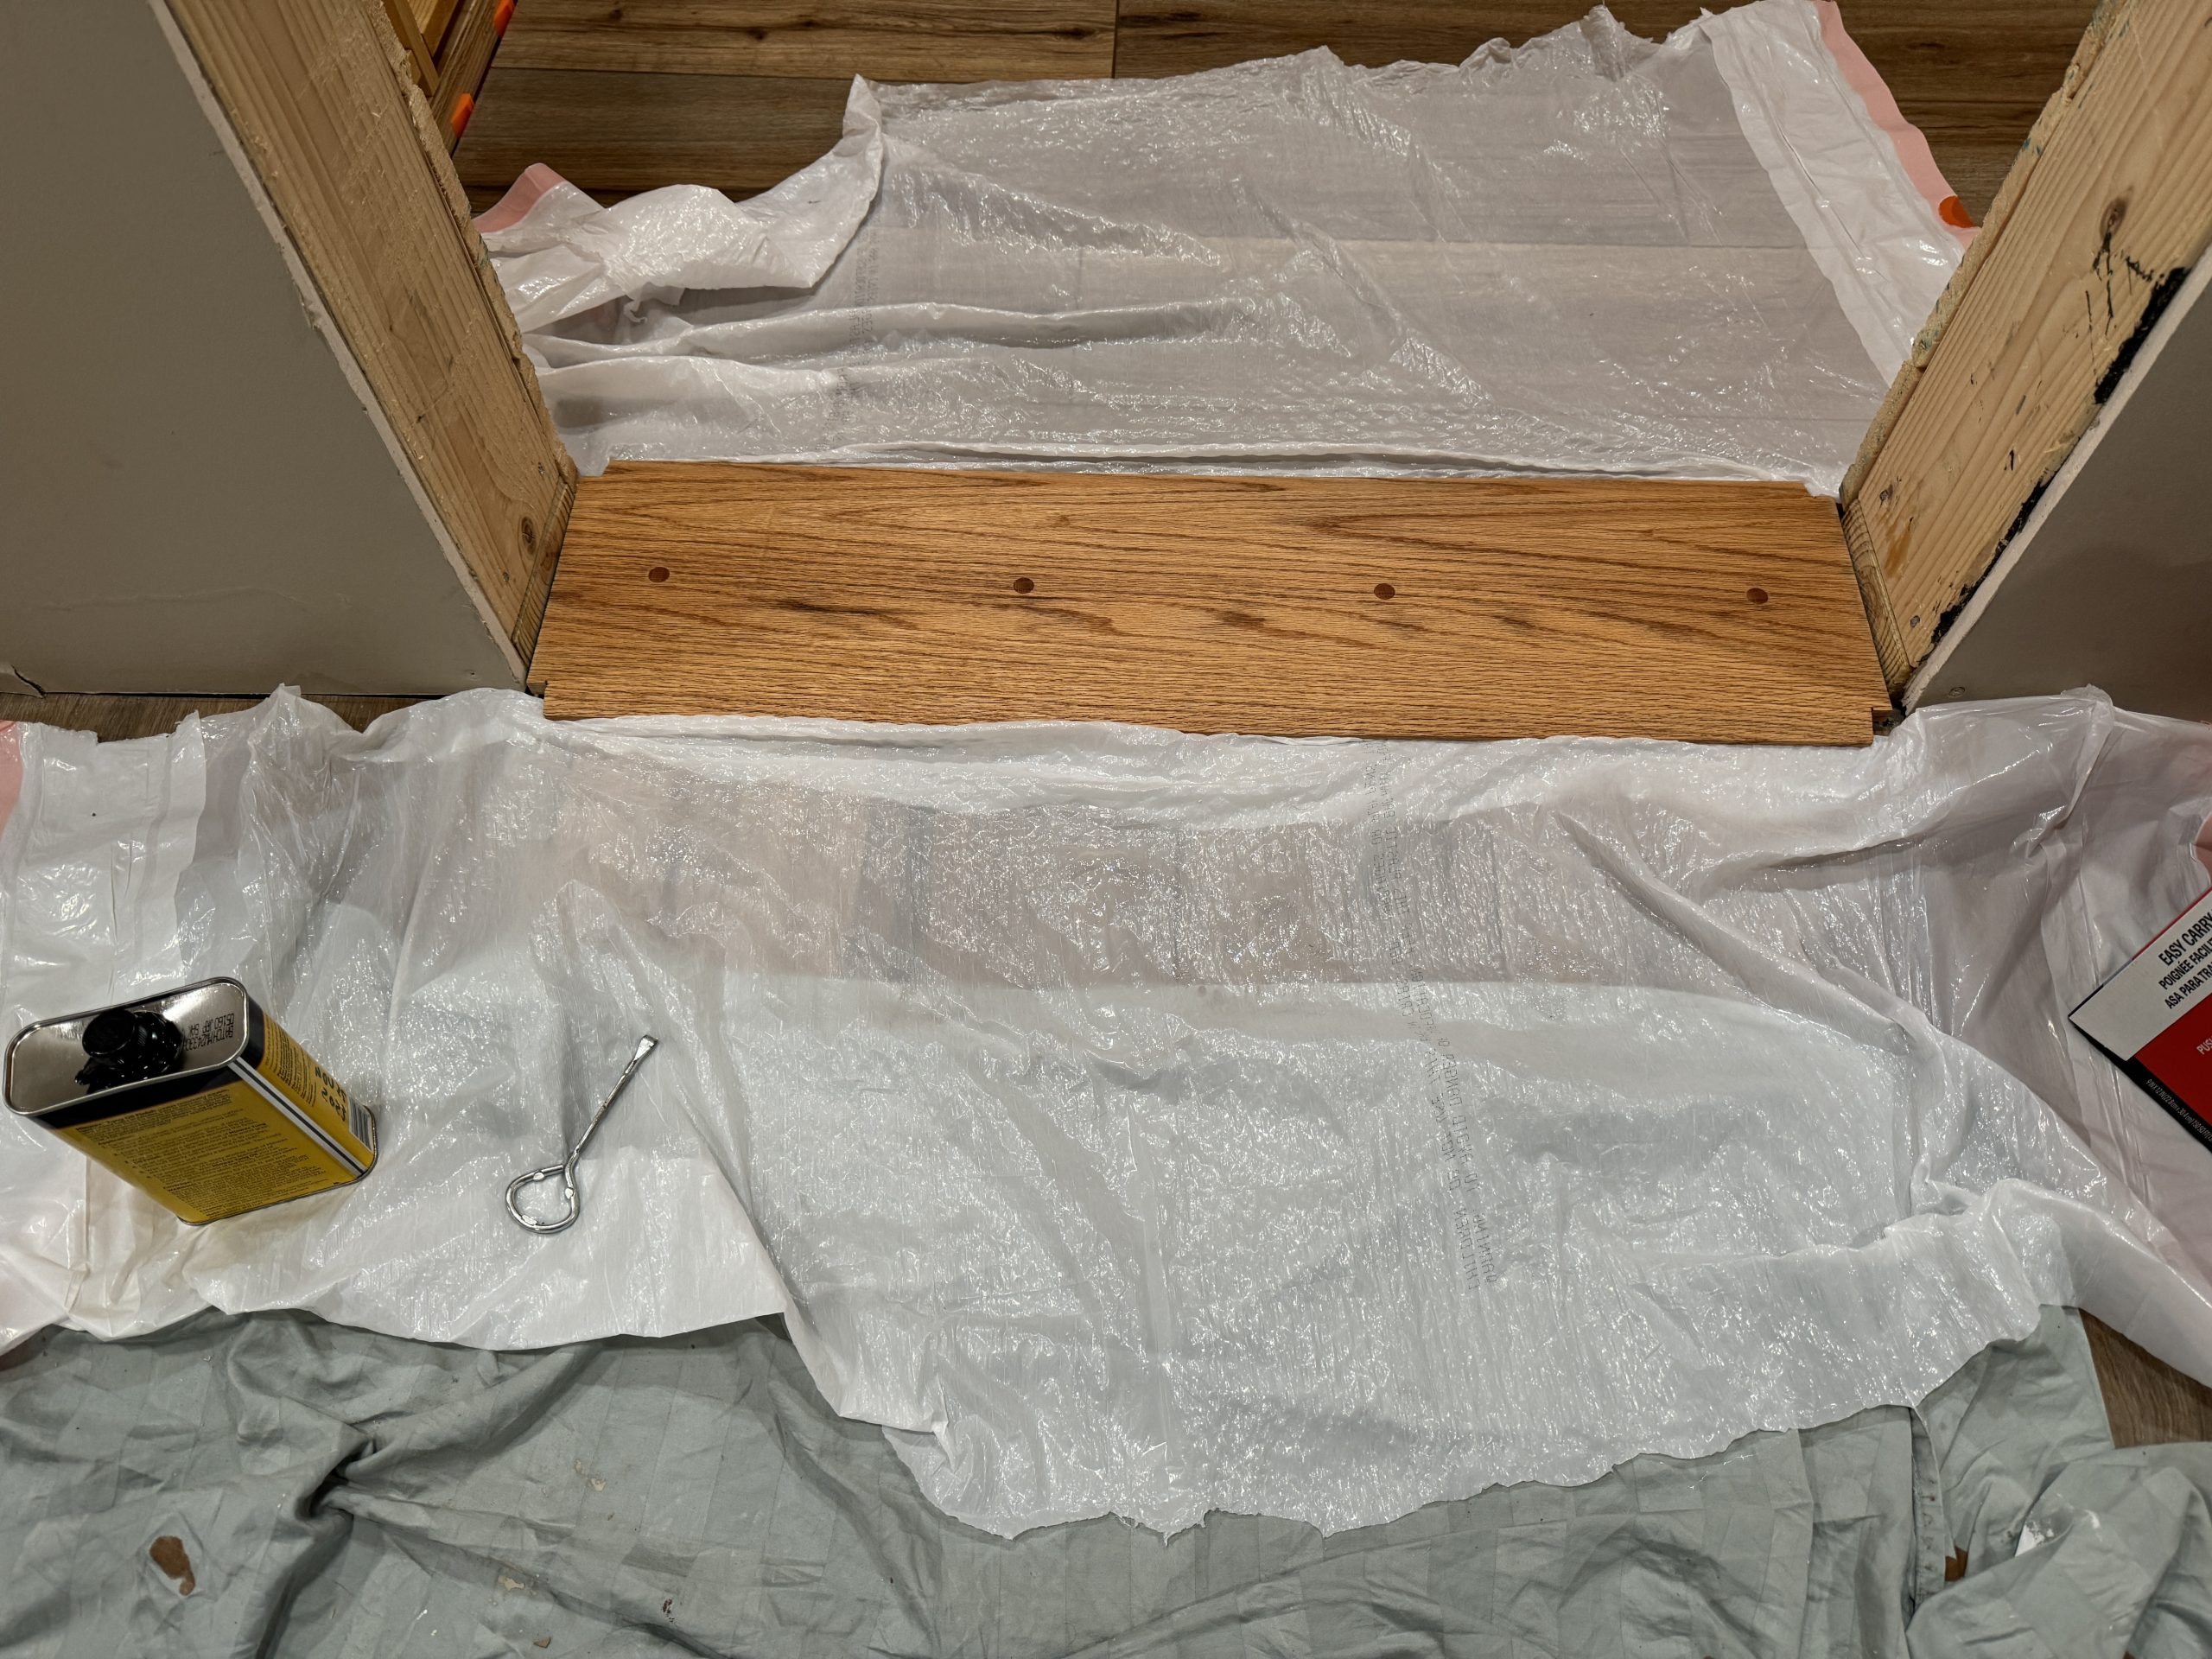 An oak door threshold surrounded by drop cloths.